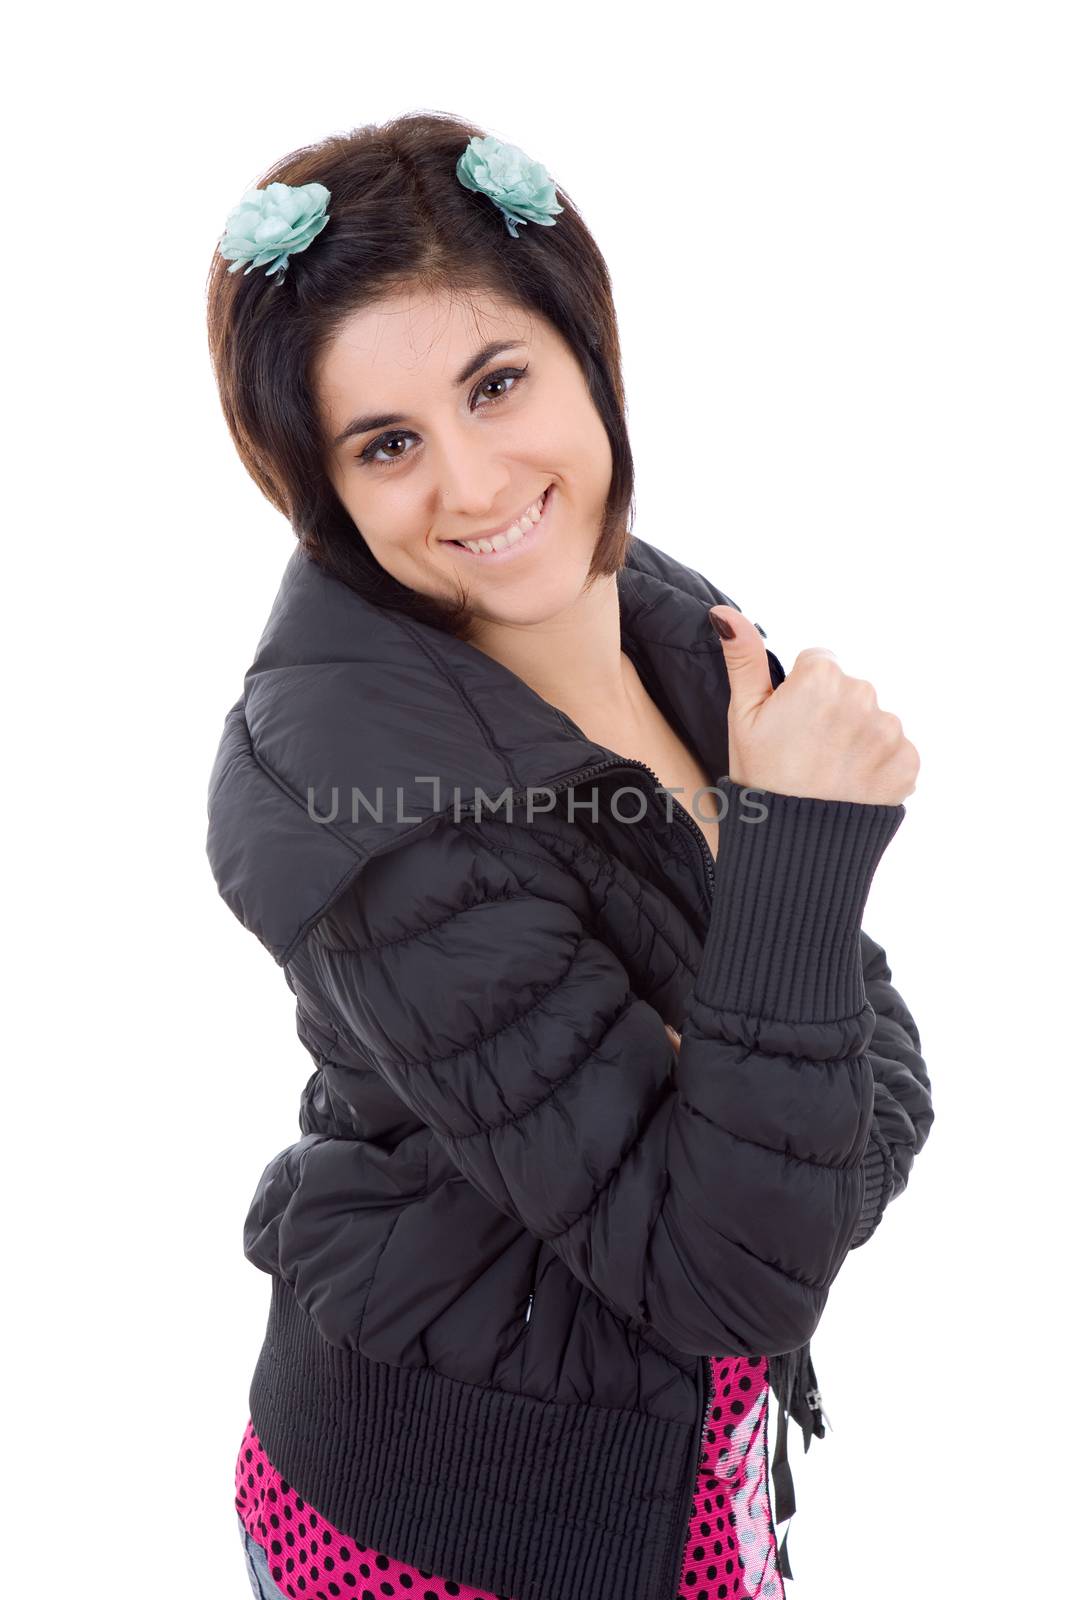 young happy beautiful woman, isolated in white